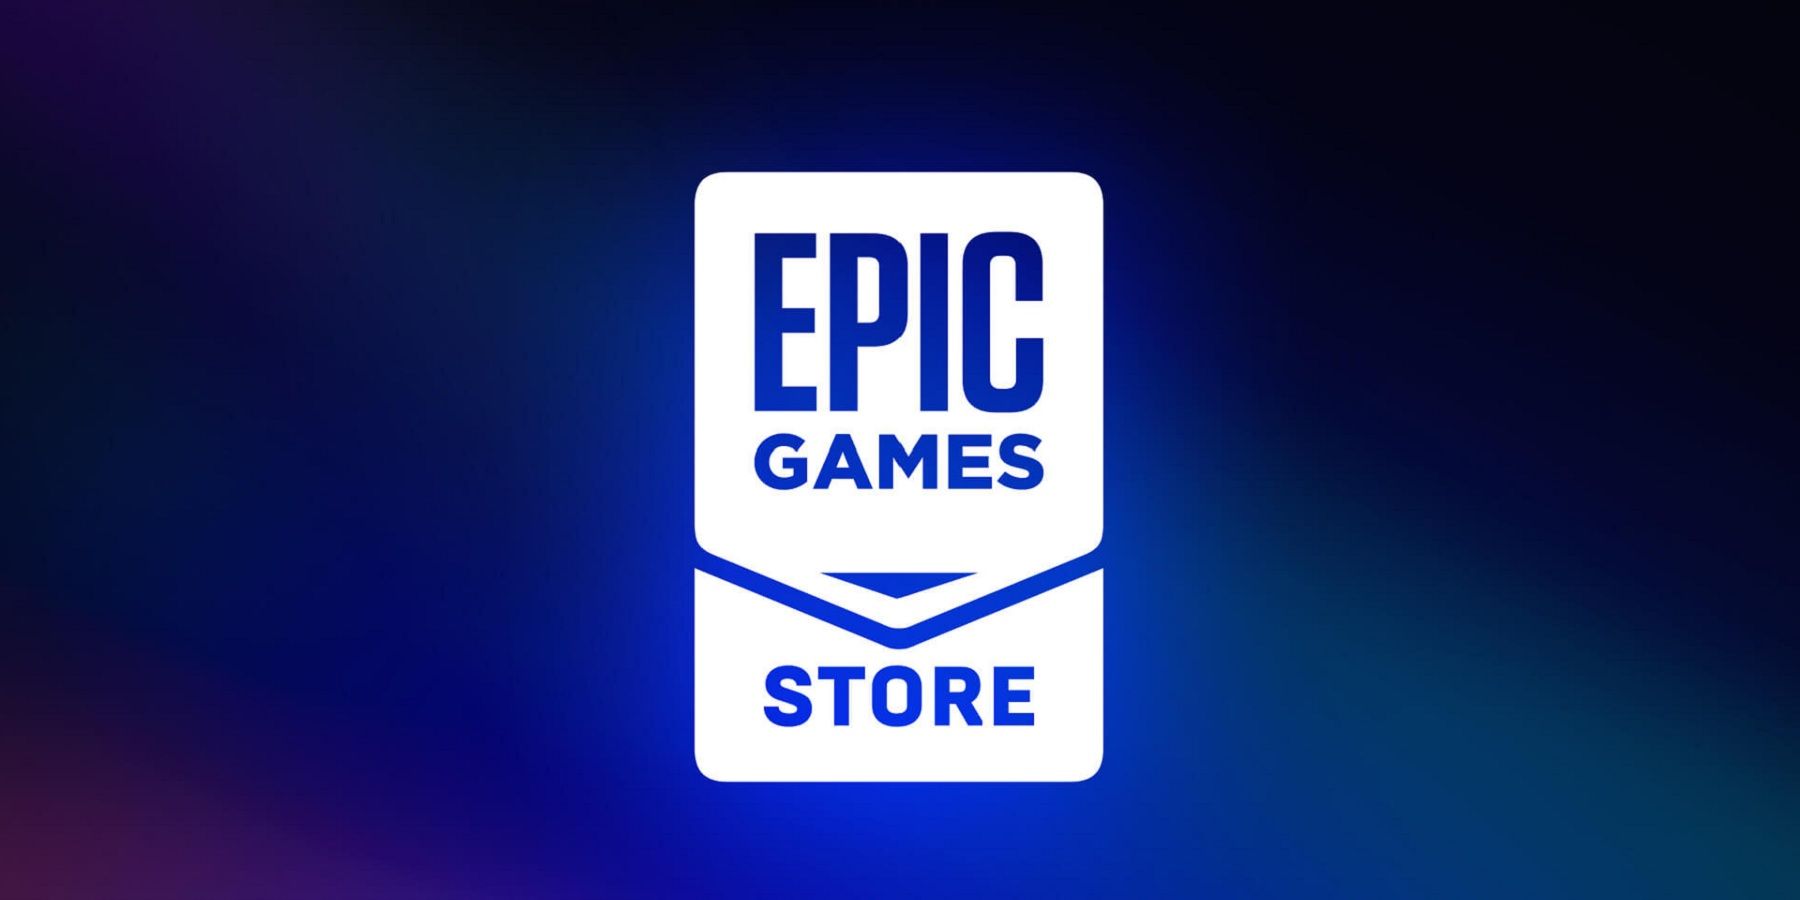 epic games store logo with blue background